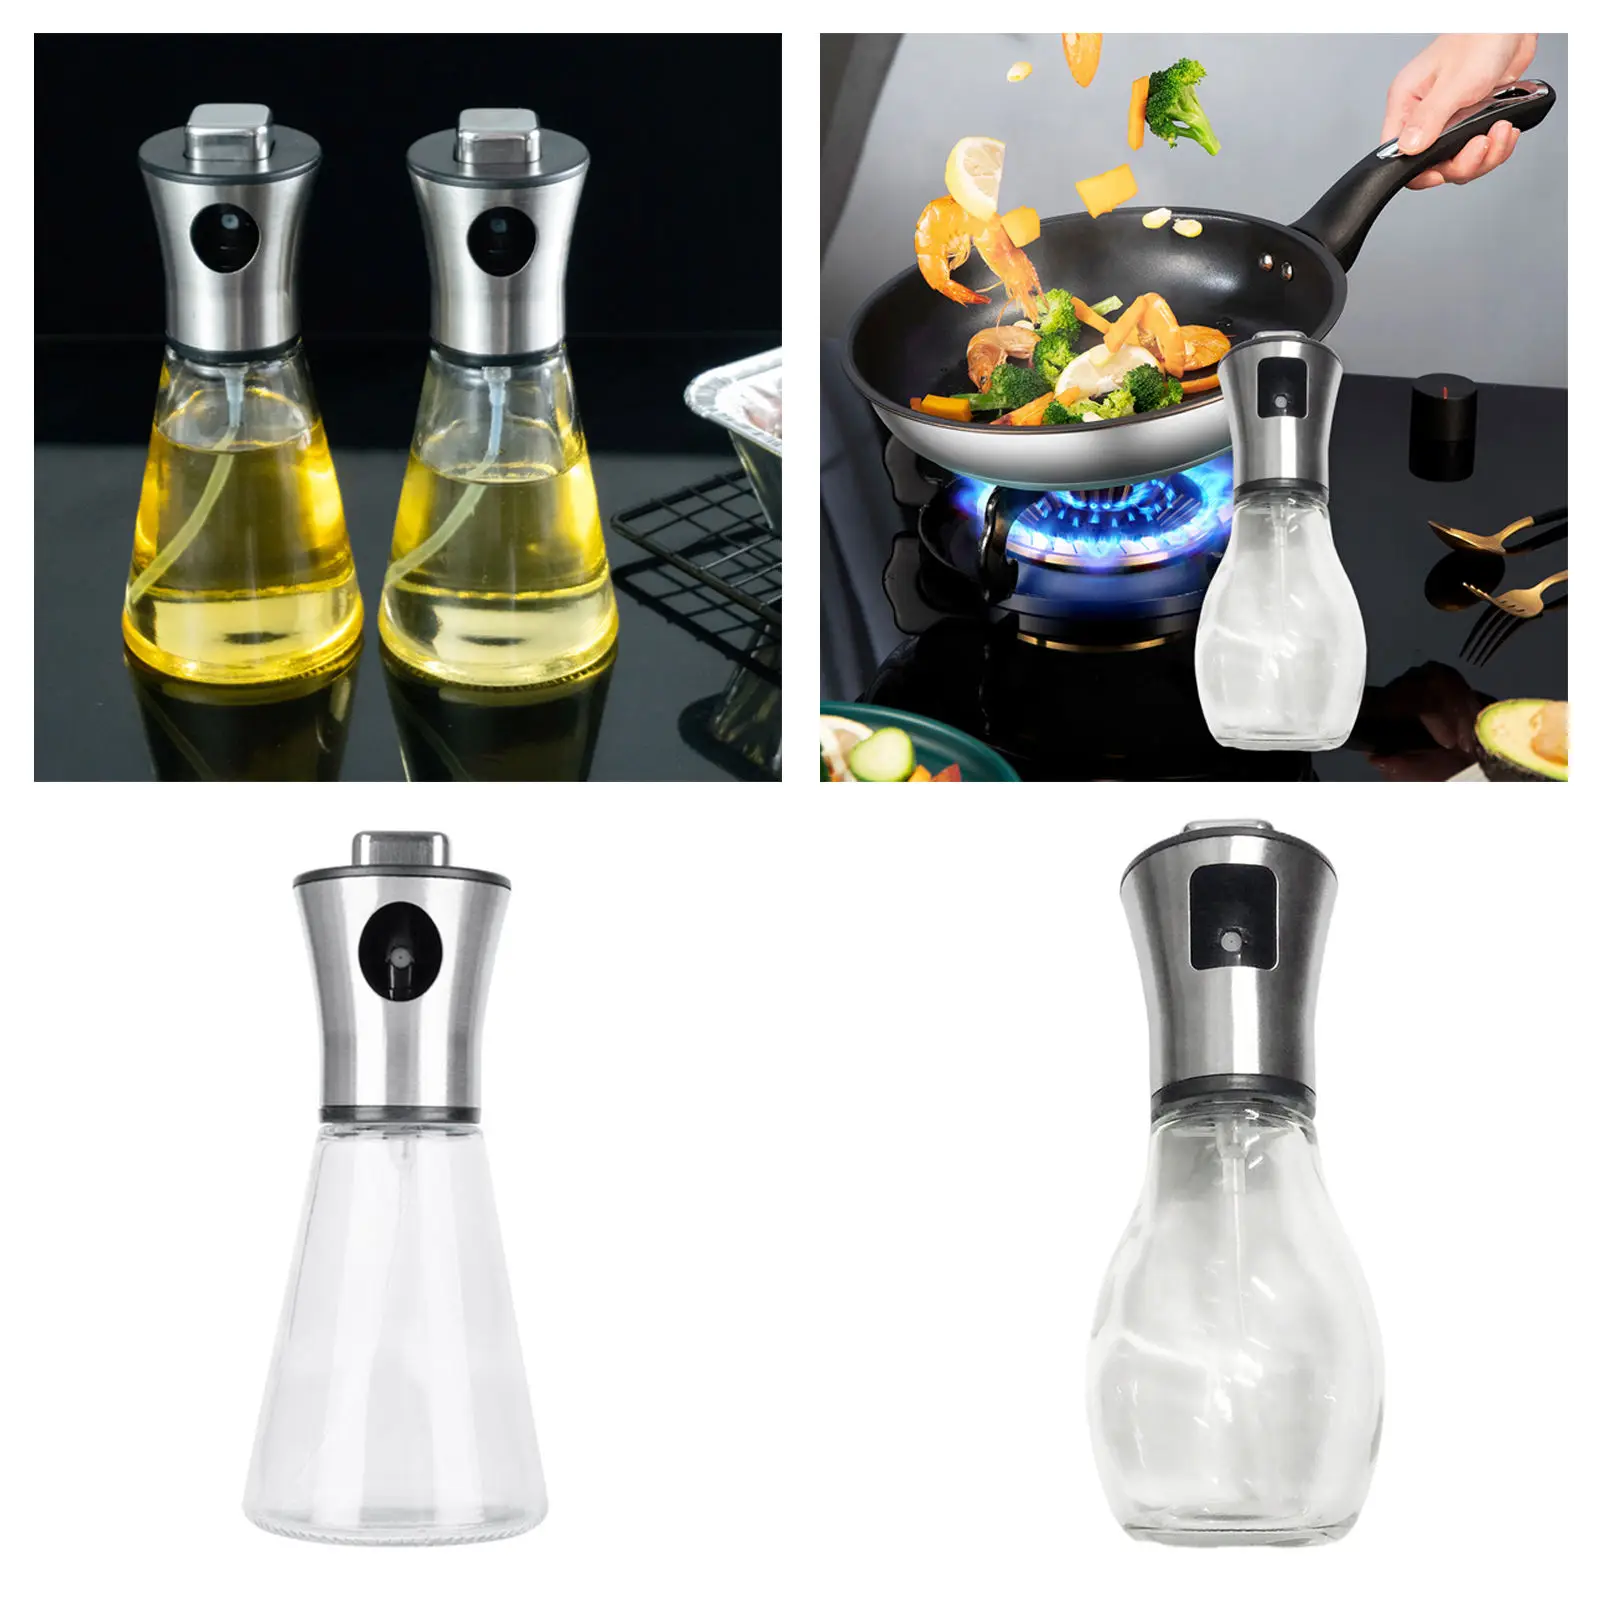 Kitchen Oil Dispenser Leak Proof Kitchen Set Cooking Tool Vinegar Accessories for Baking Cooking Grilling Roasting Barbecue